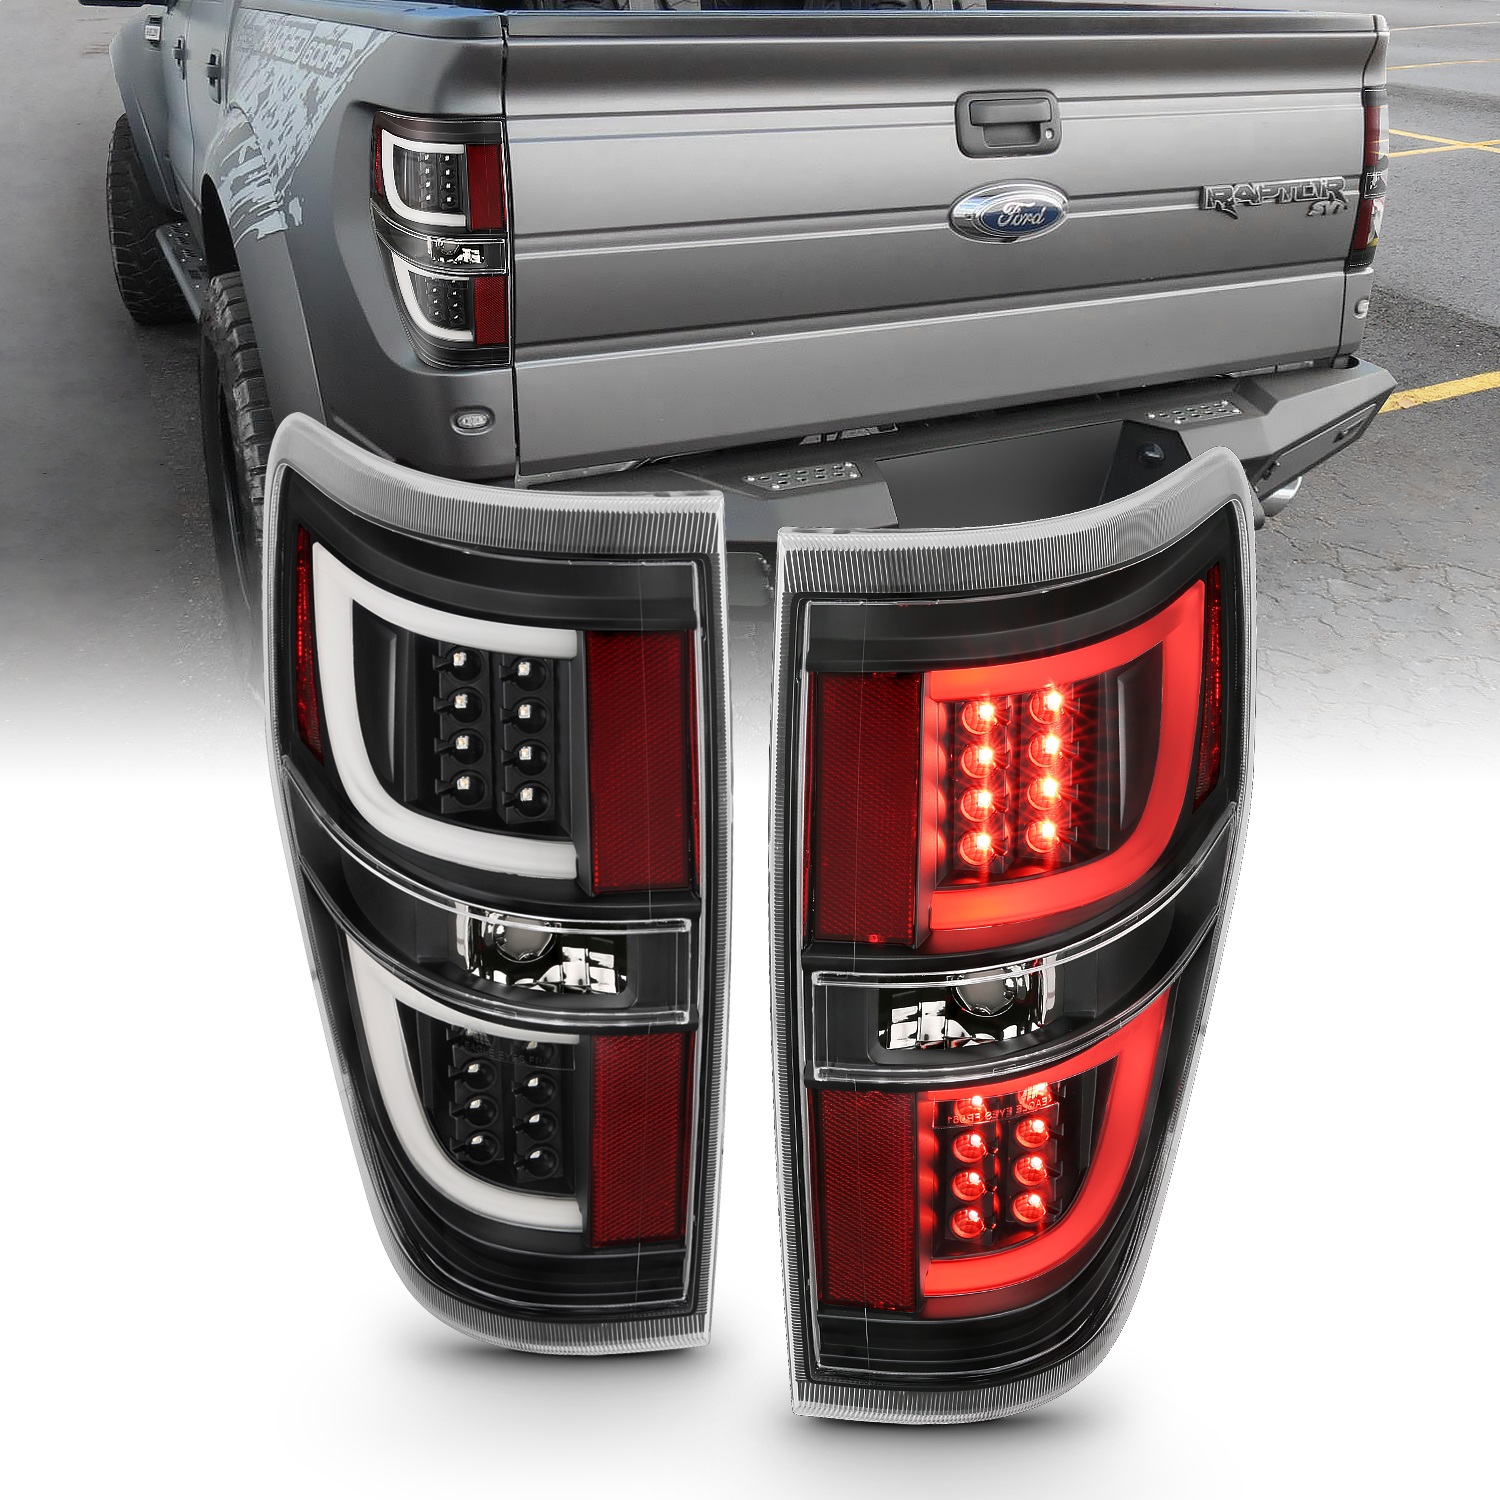 AnzoUSA 311257 Tail Light Assembly Fits 09-13 F-150